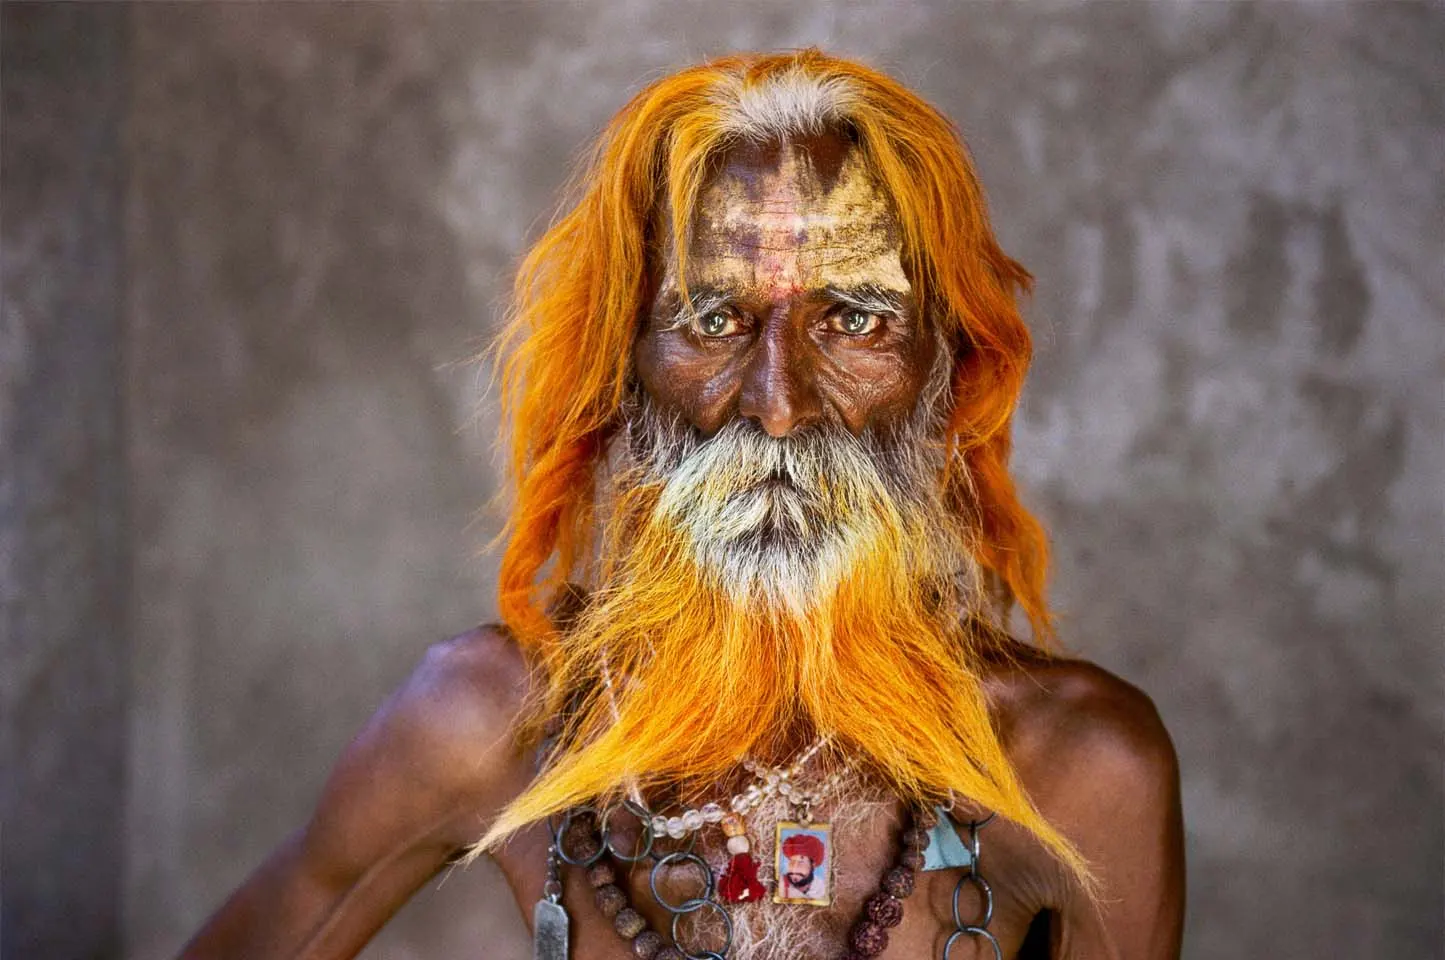 AWARD-WINNING PHOTOGRAPHER - Steve McCurry ICONS in Melbourne: A Photography Exhibition